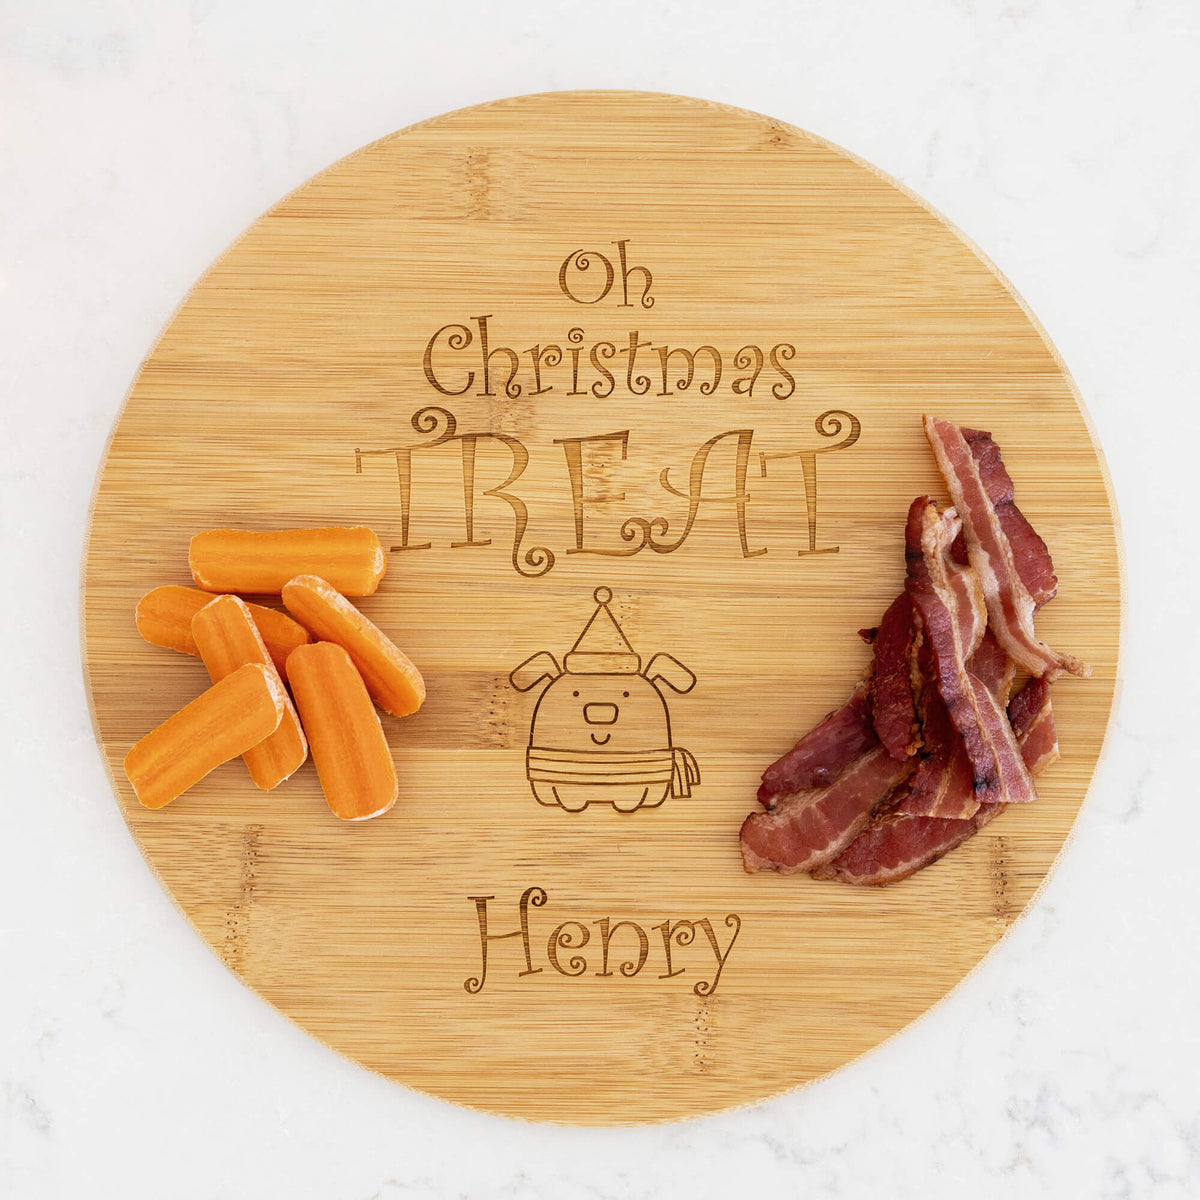 Oh Christmas Treat - PERSONALIZED Pet&#39;s Barkuterie Board - Bamboo